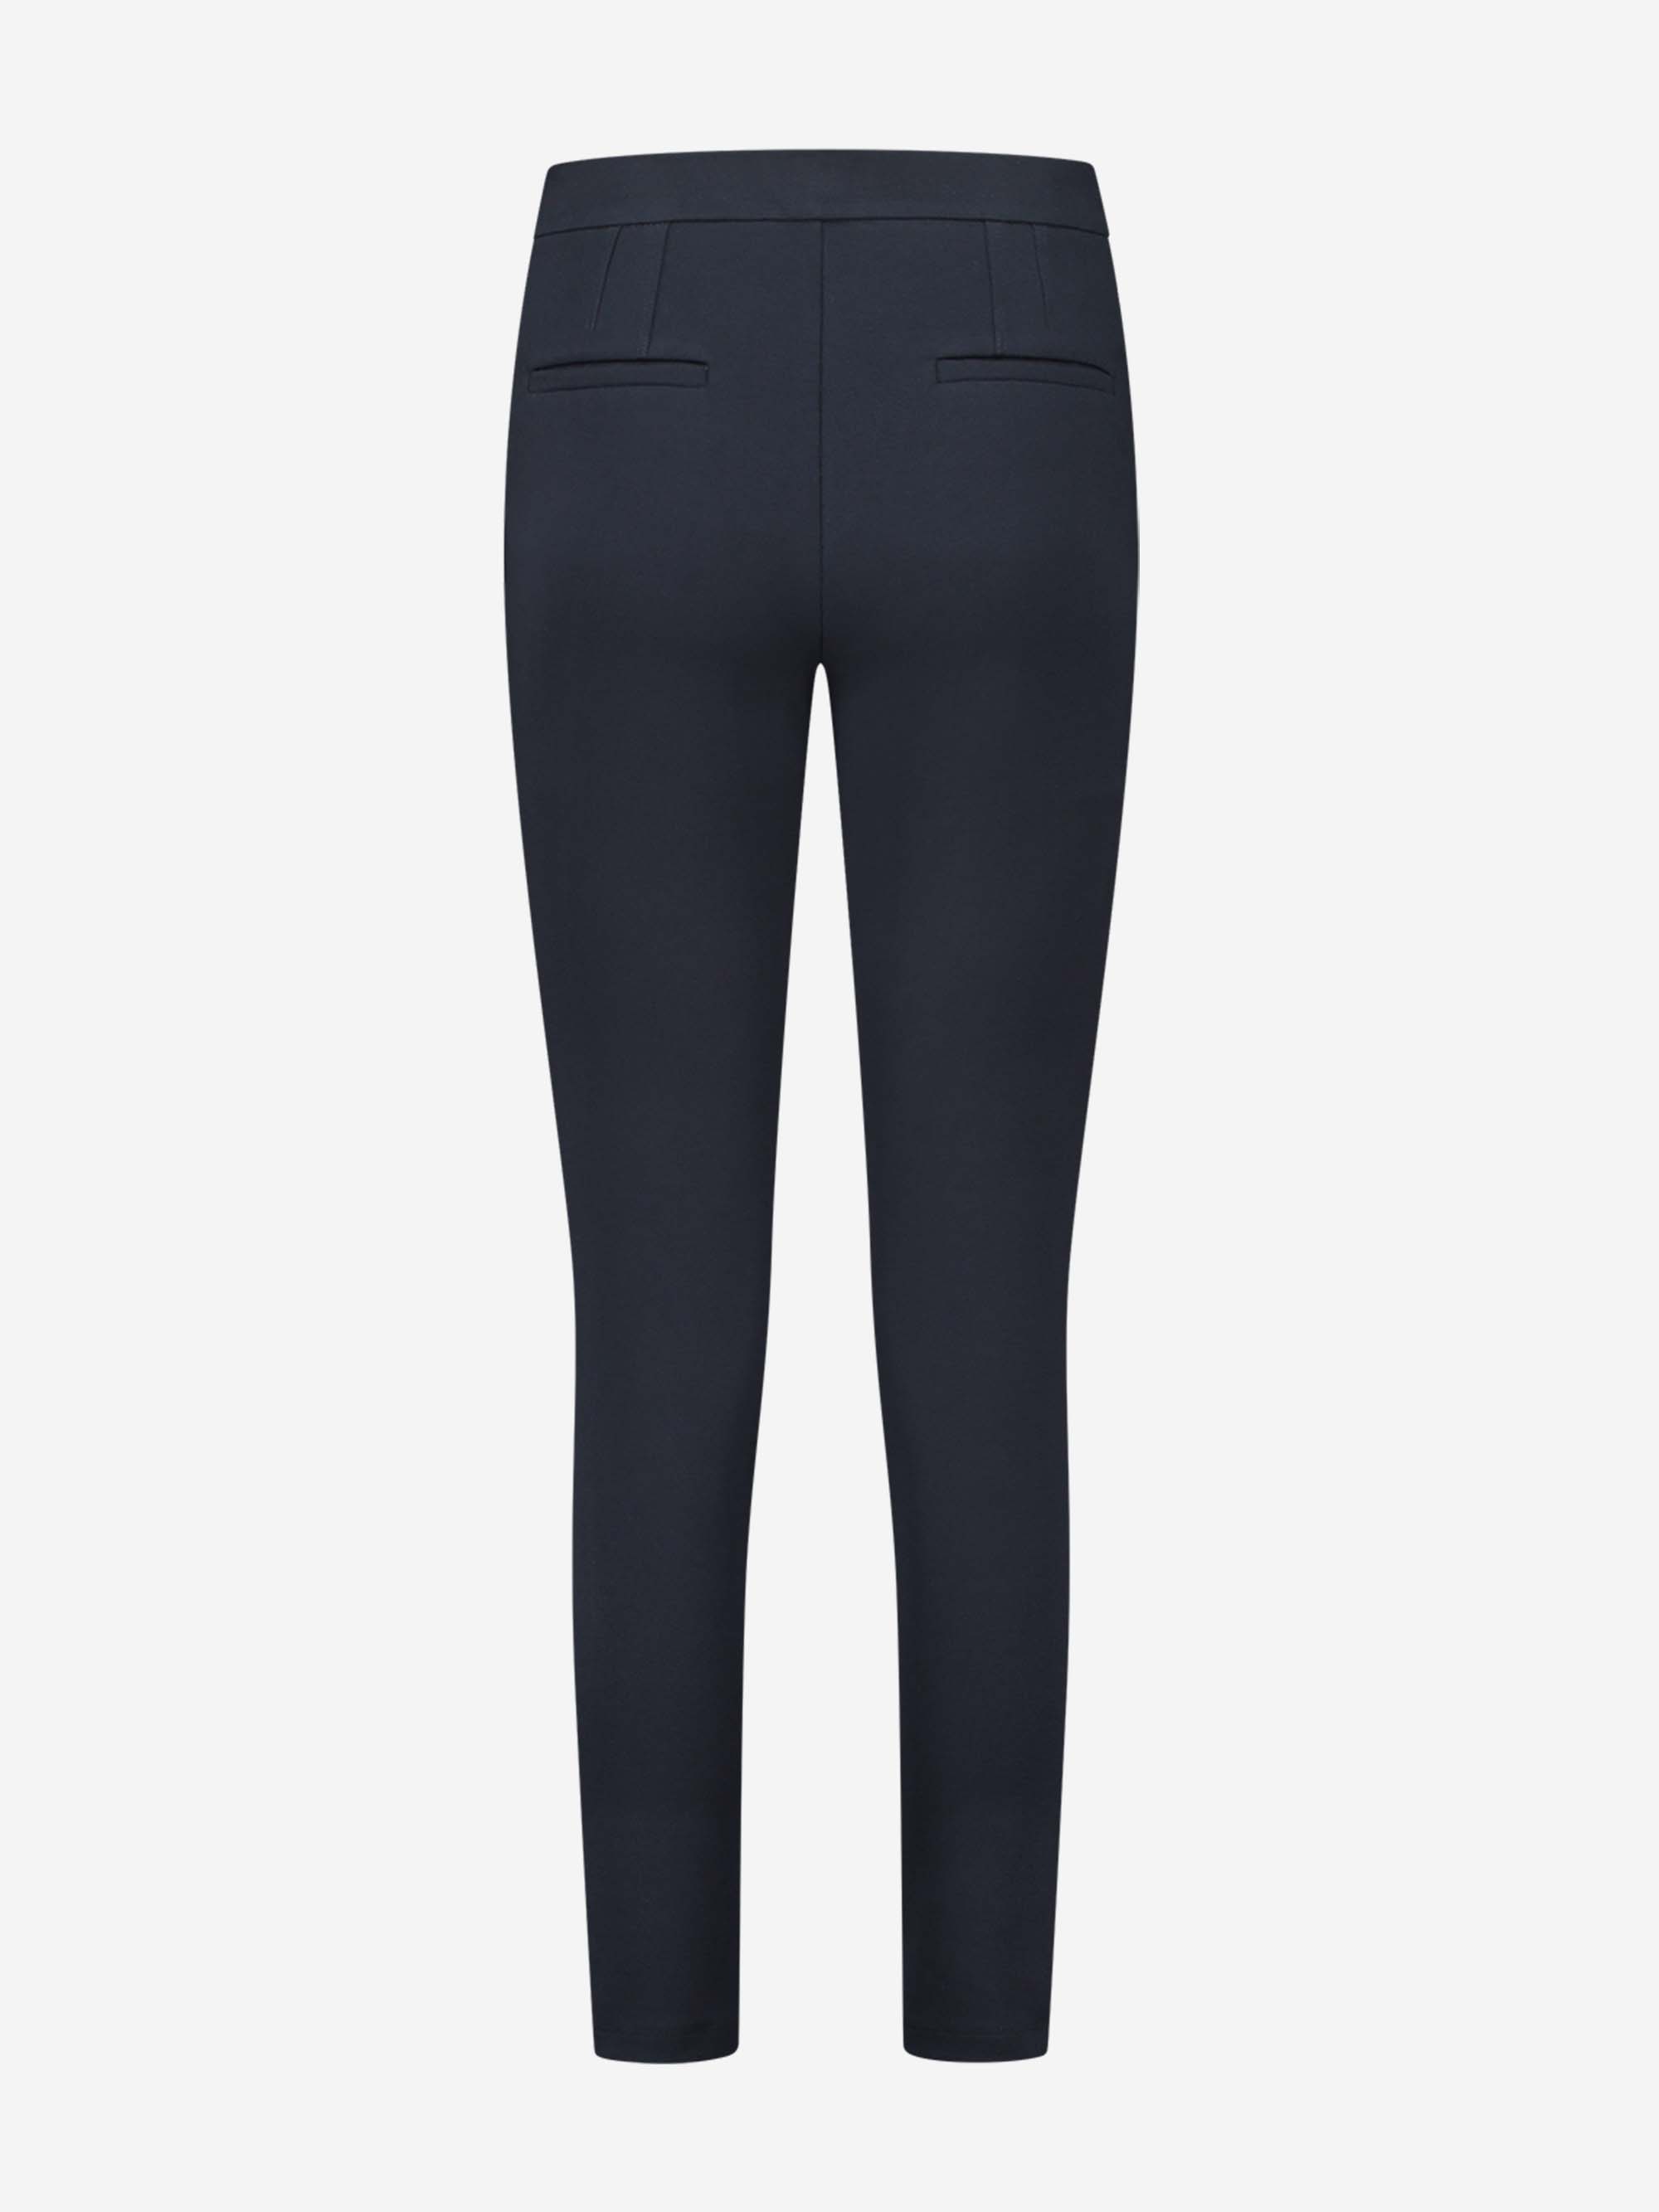 Skinny trousers with high rise